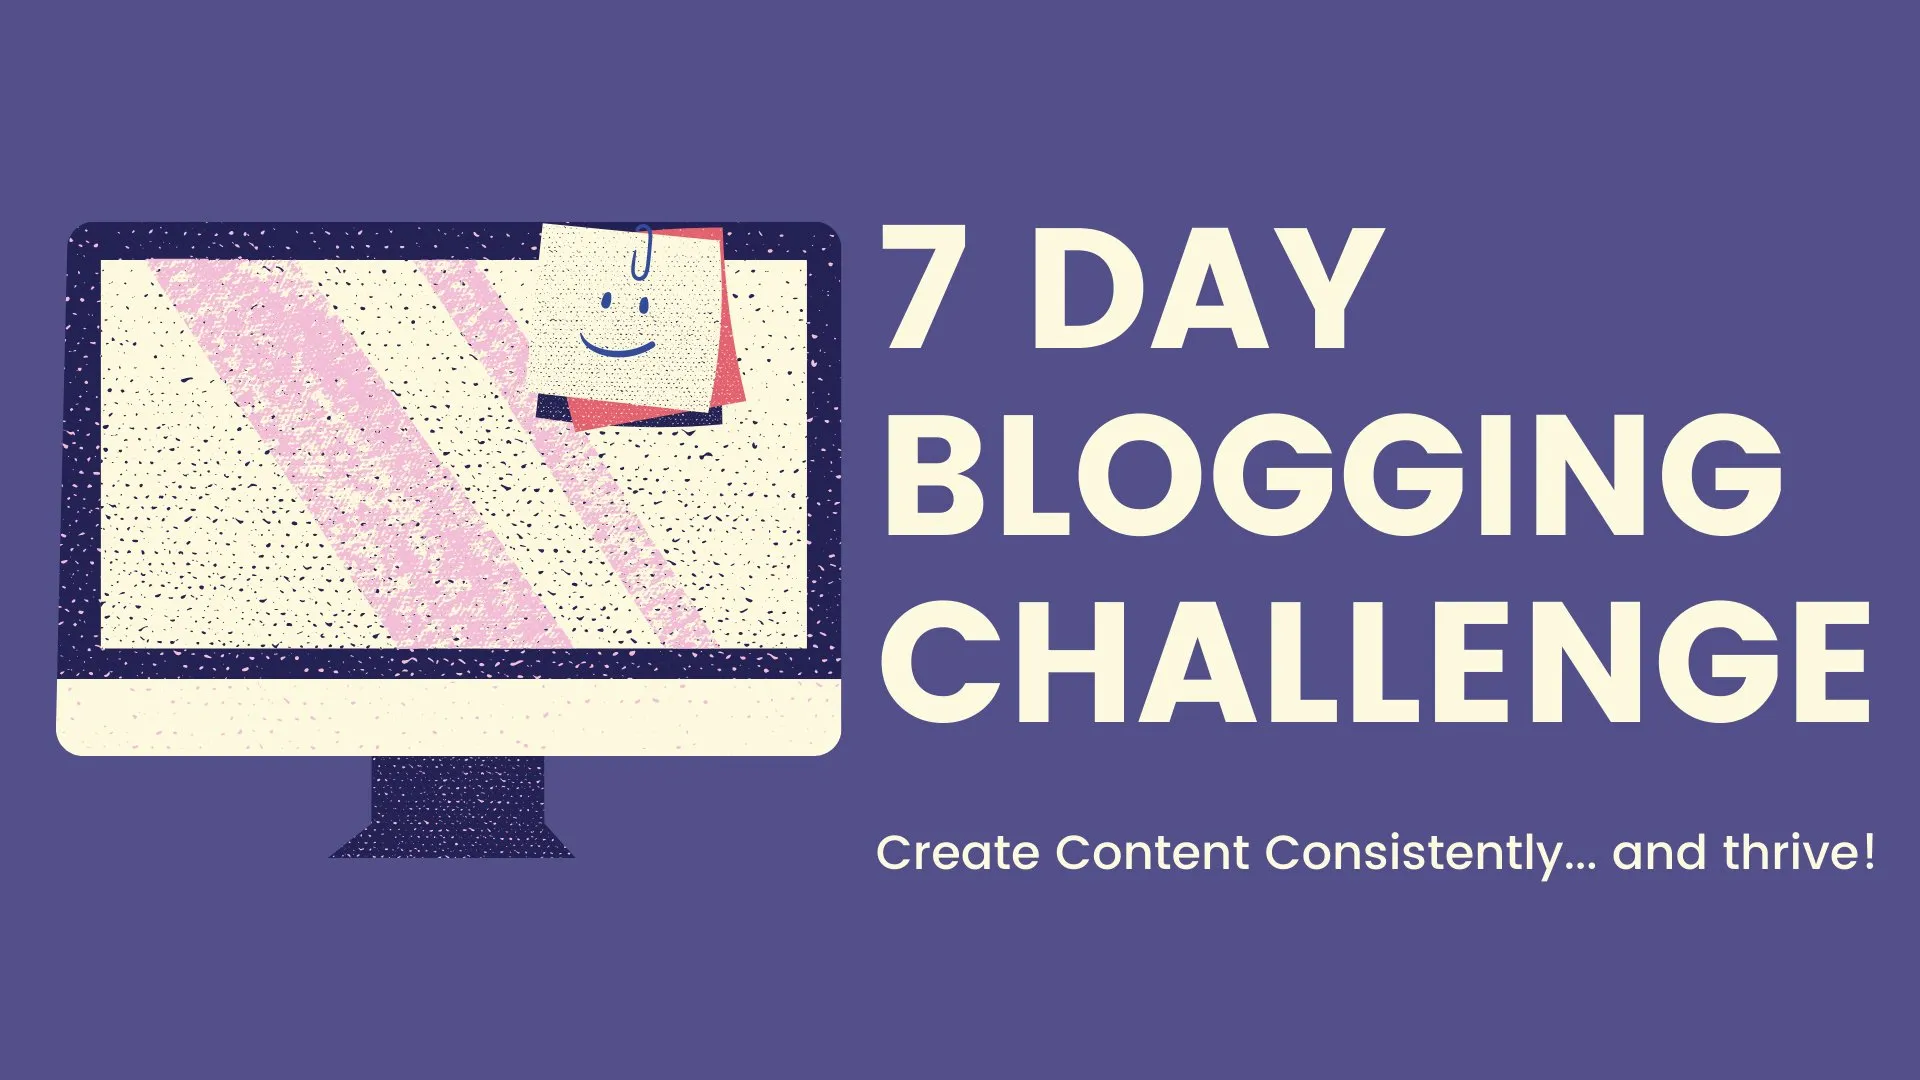 How to Create Content Consistently 7 Day Blogging Challenge